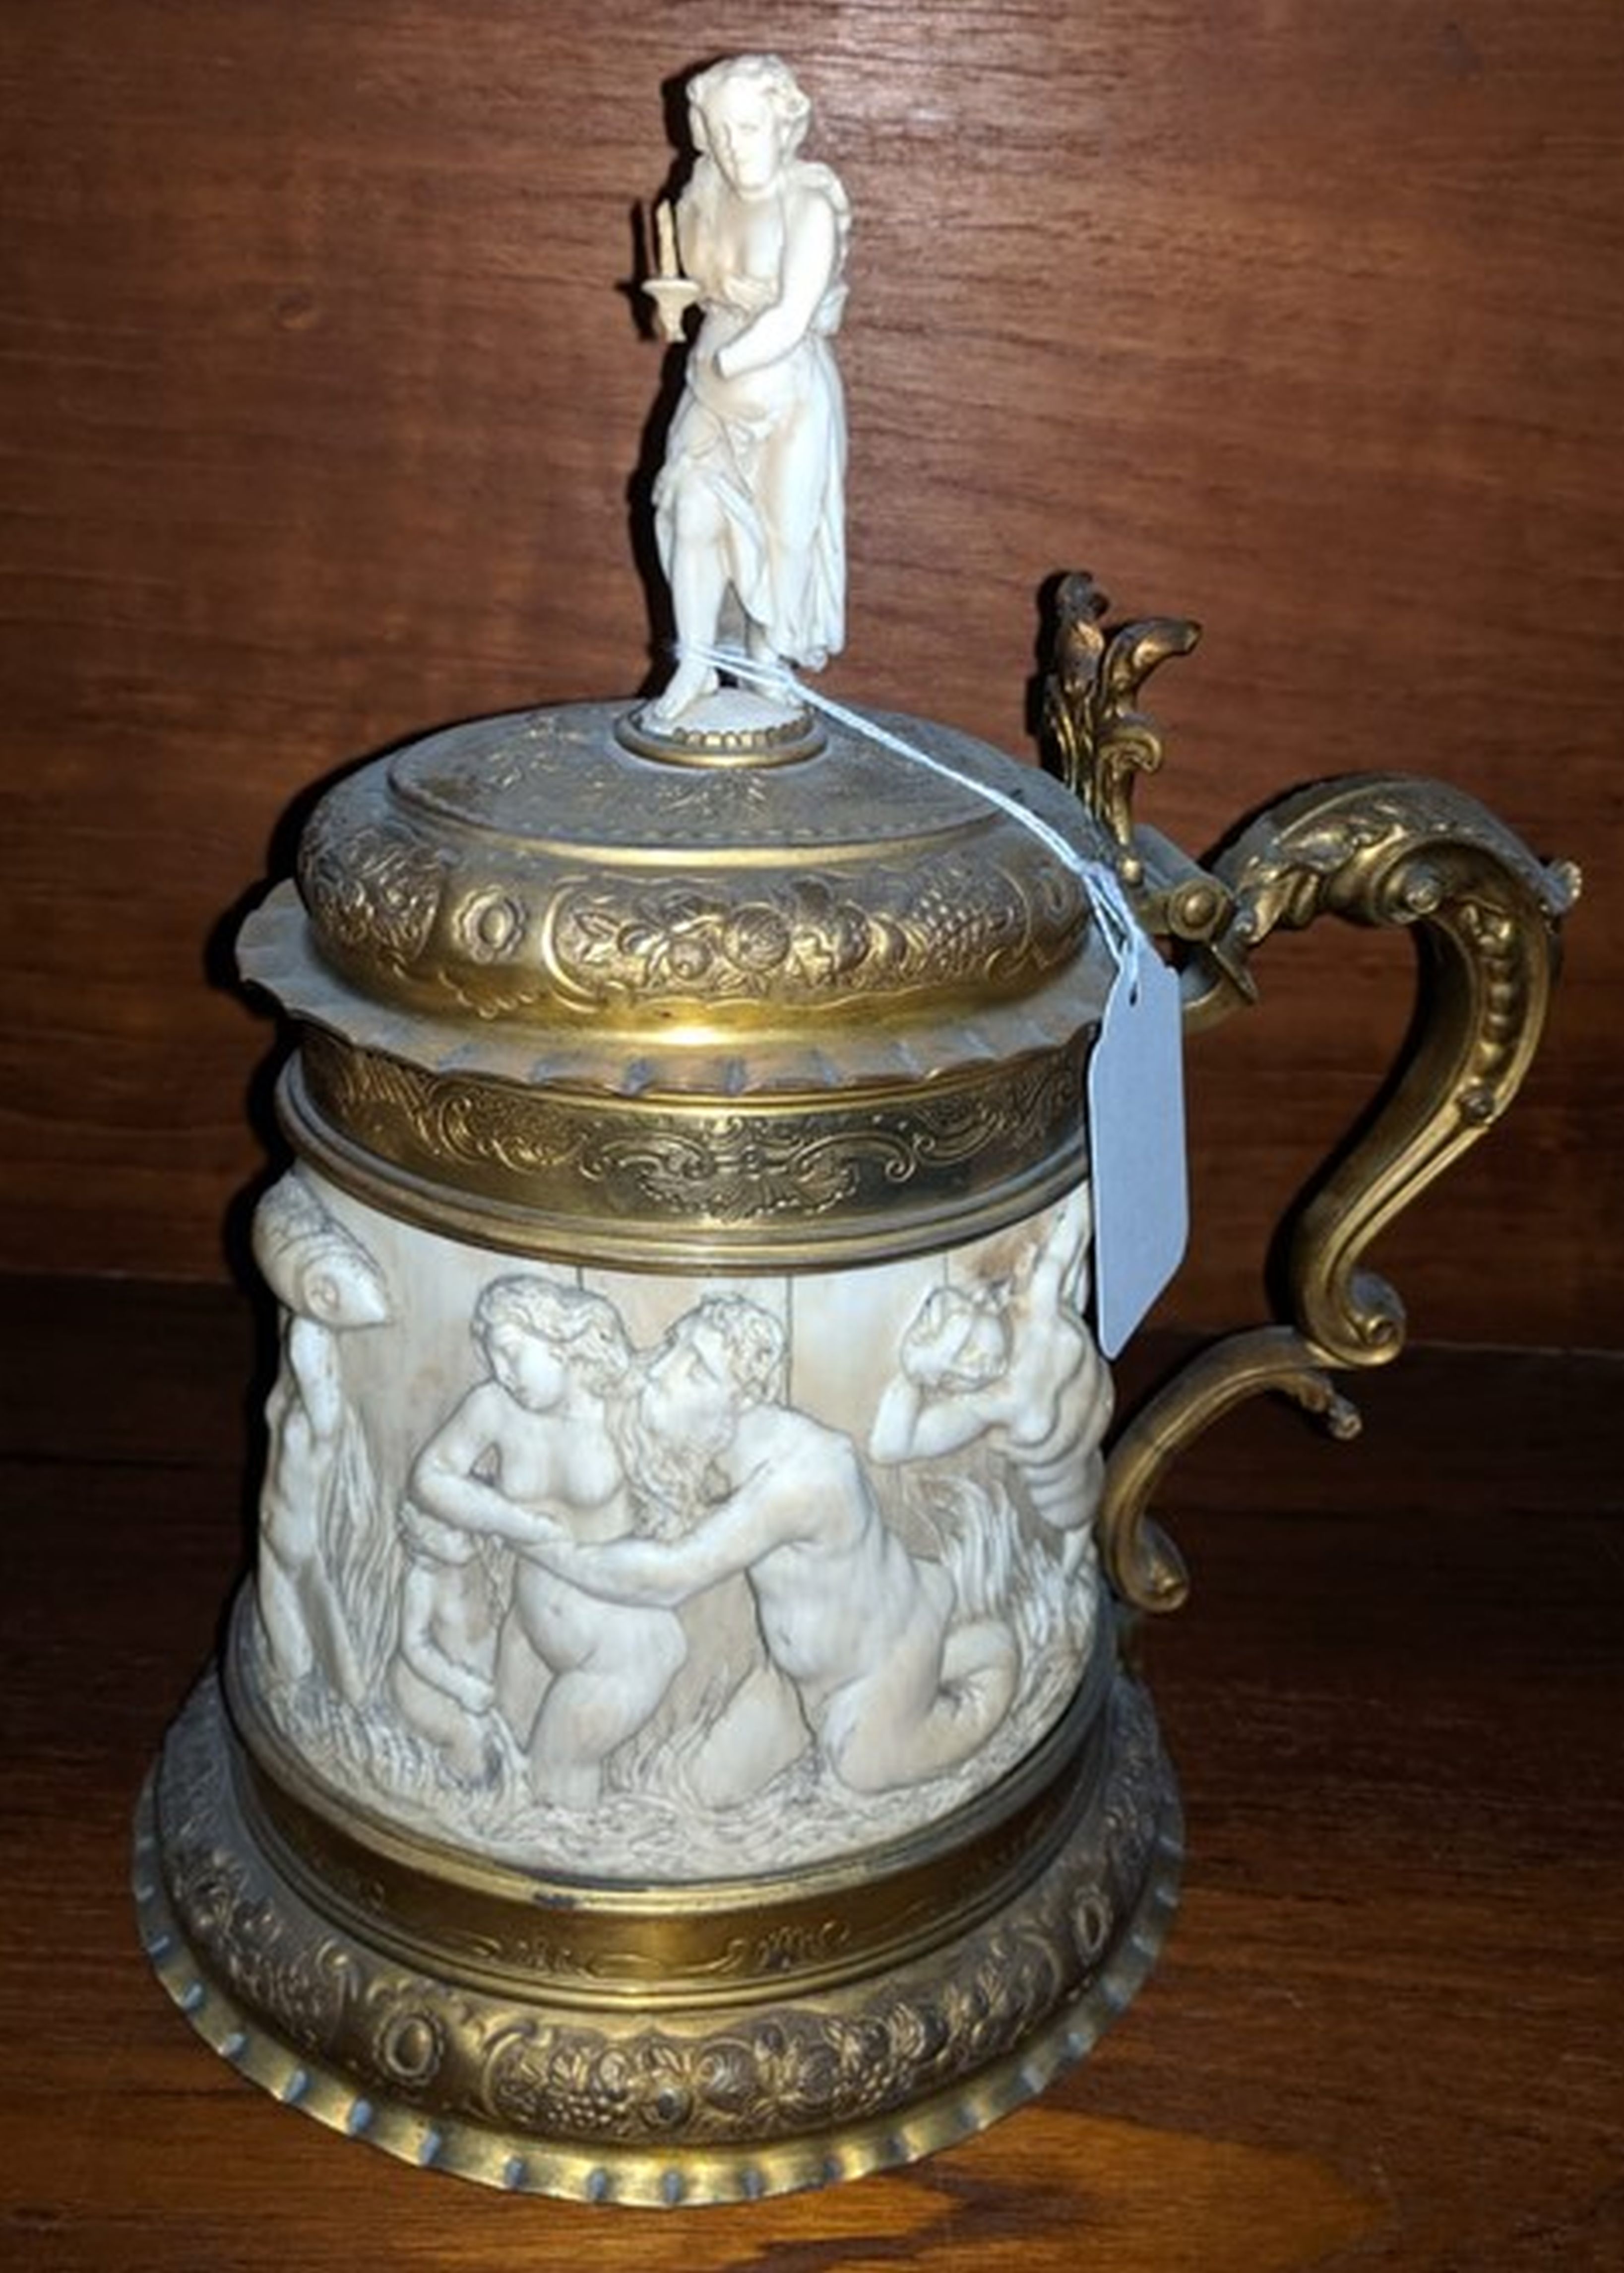 A 19th century German ormolu mounted ivory tankard, carved in relief with a frieze of tritons and